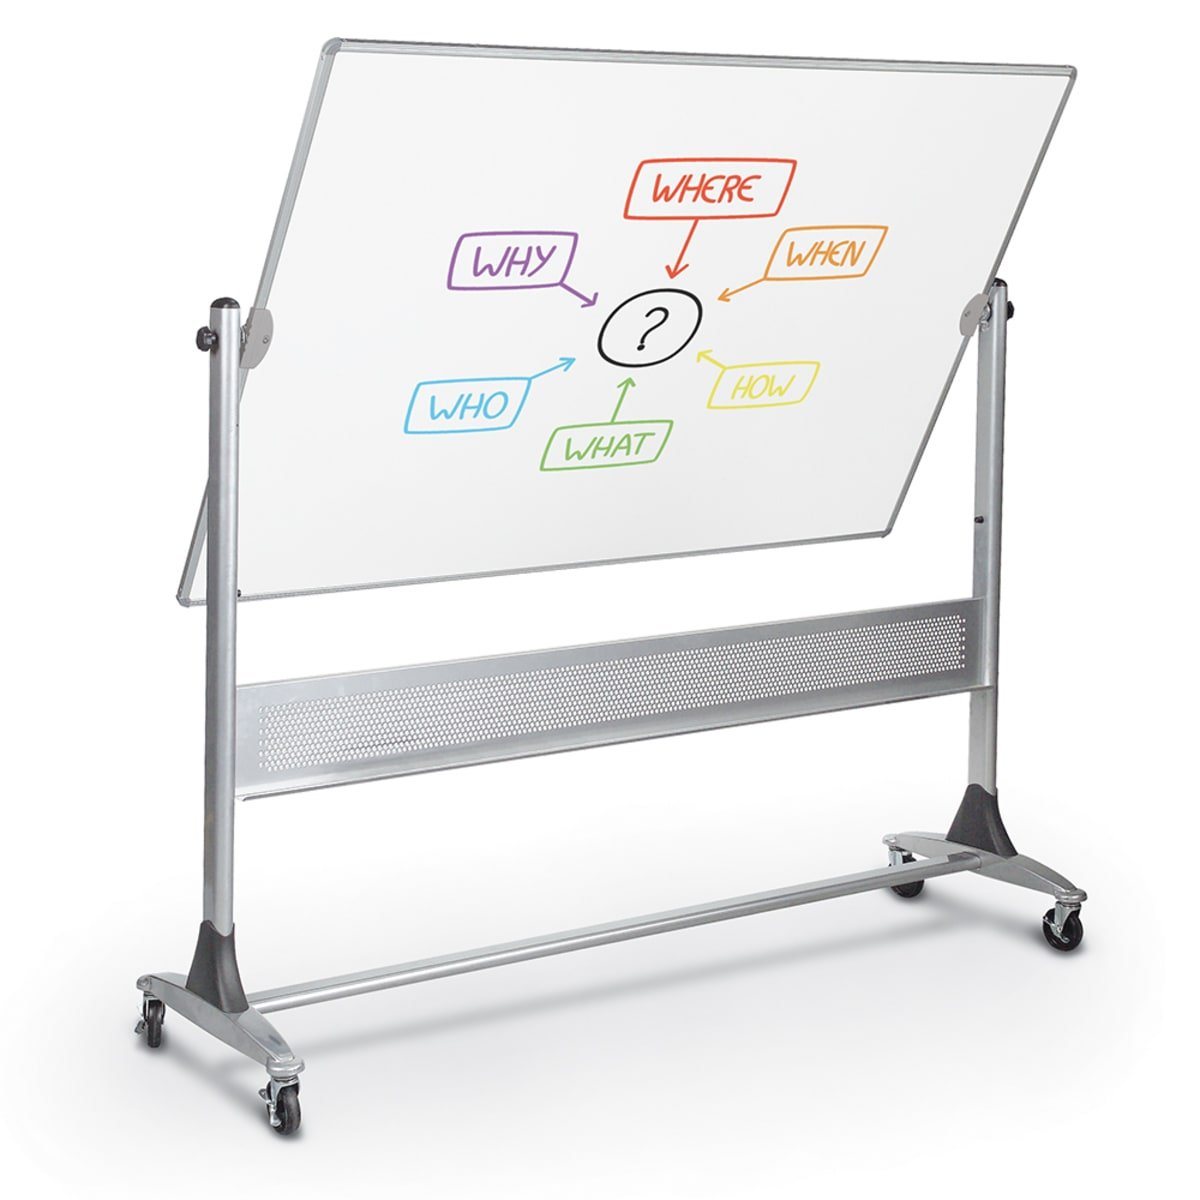 Mooreco Mobile Reversible Board Dura-Rite Markerboard - Both Sides 4'H x 6'W (MOR-669RG-HH) - SchoolOutlet